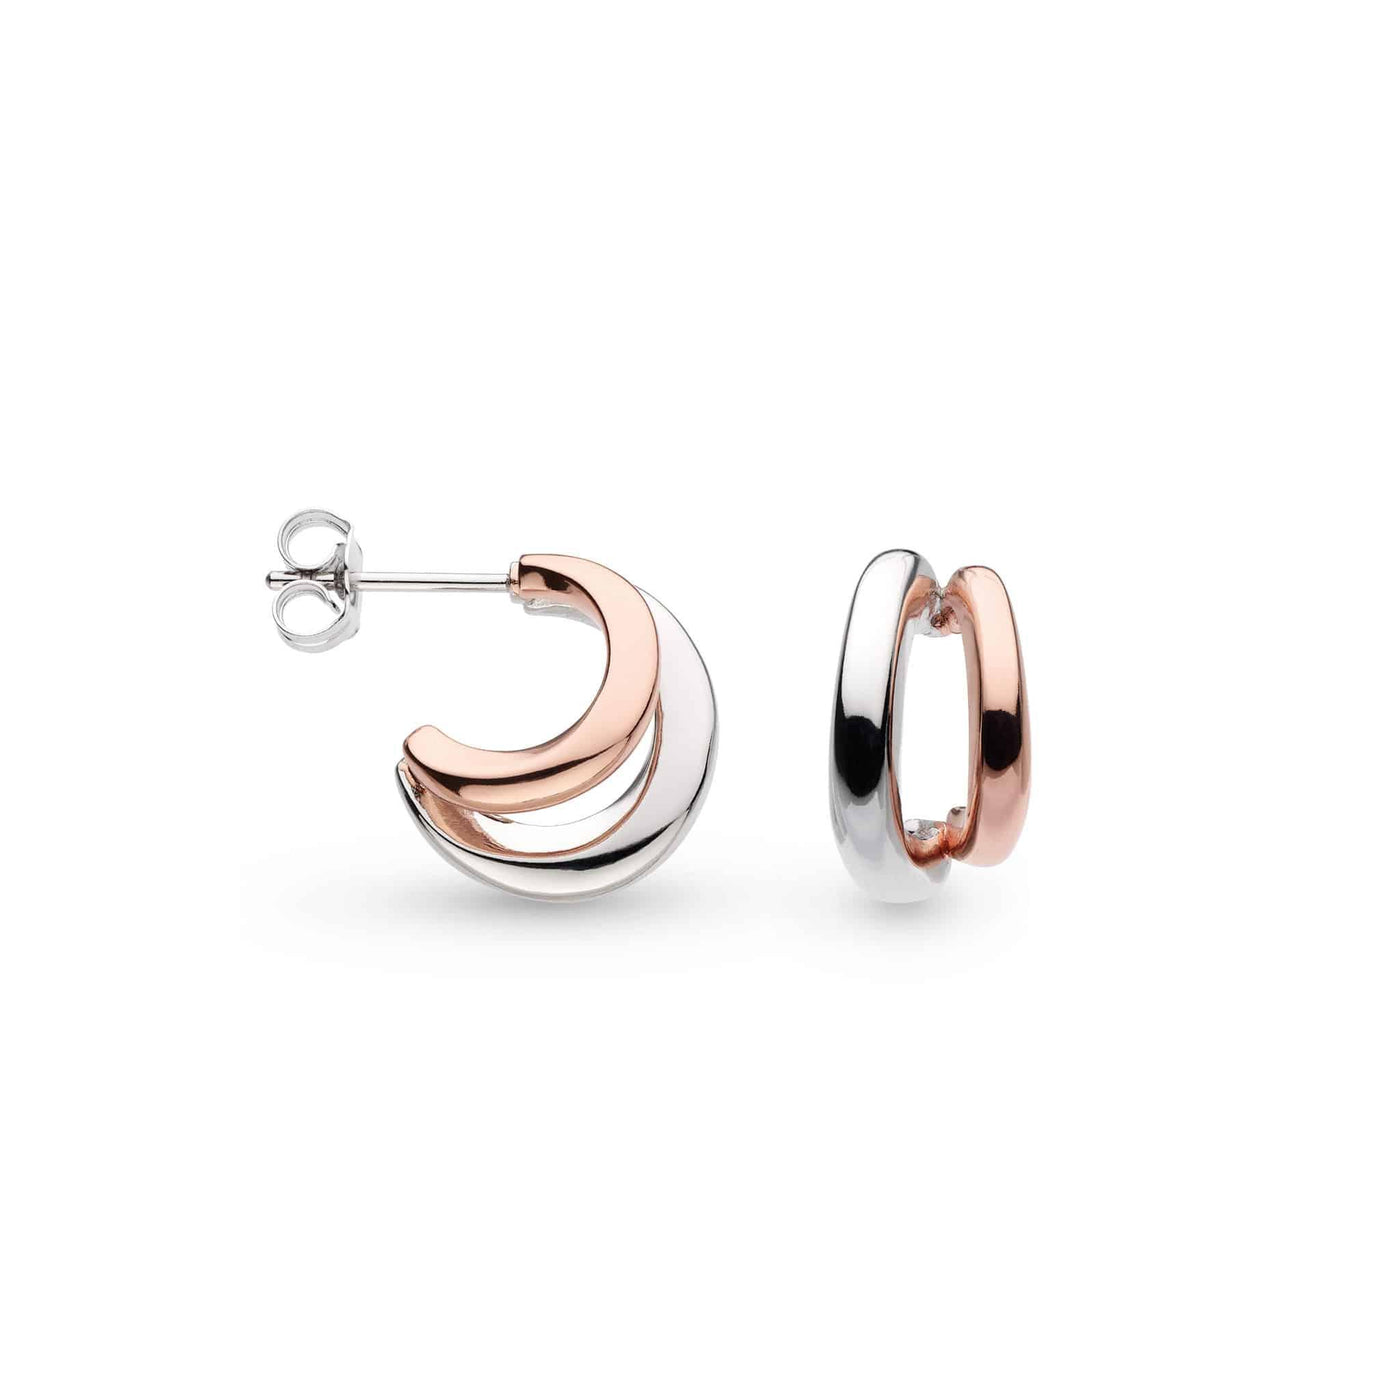 Kit Heath 18ct Rose Gold Vermeil and Silver Bevel Cirque Link Twin Hoop Earrings - Rococo Jewellery